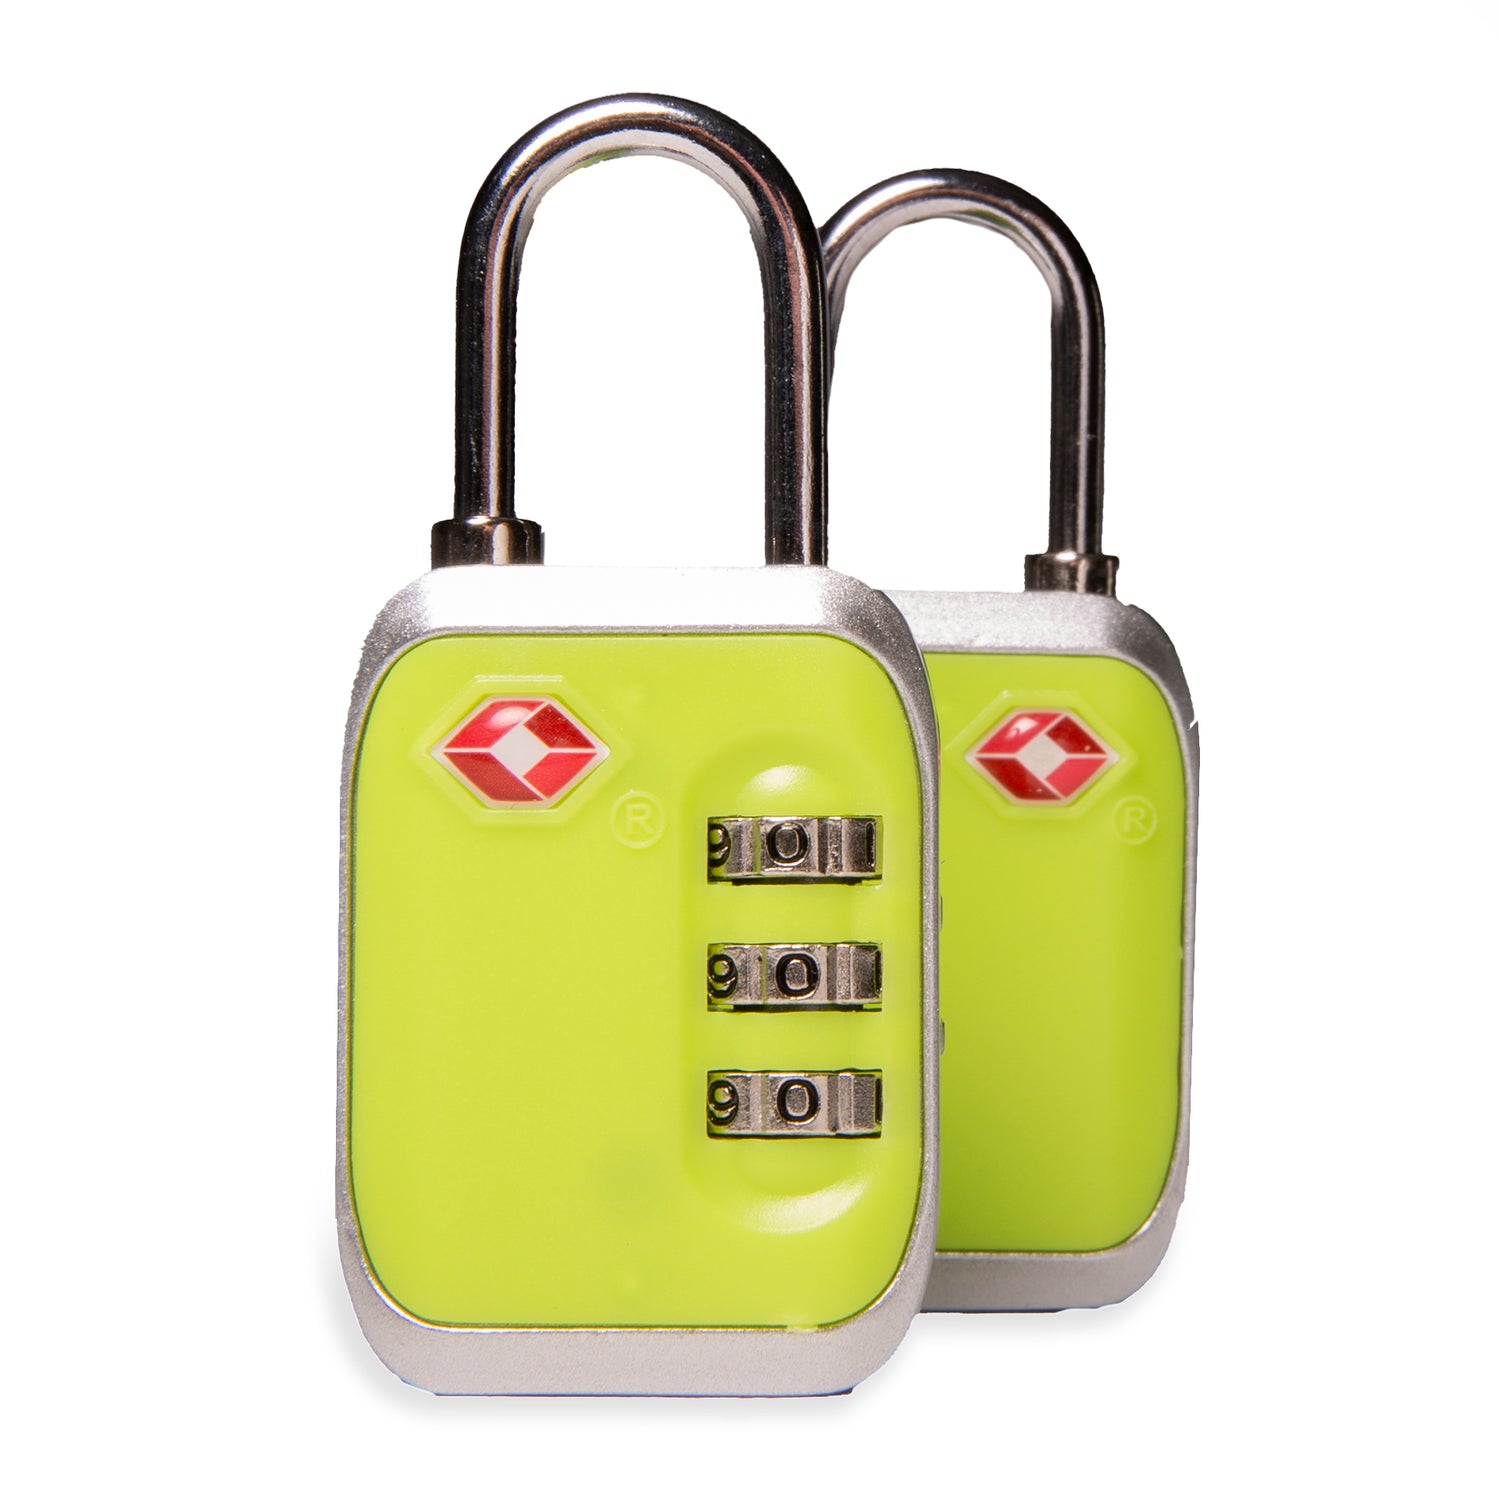 Front of 2 yellow and metallic tsa-approved locks designed by Tracker on white background, showcasing its 3-dial feature and red TSA logo.